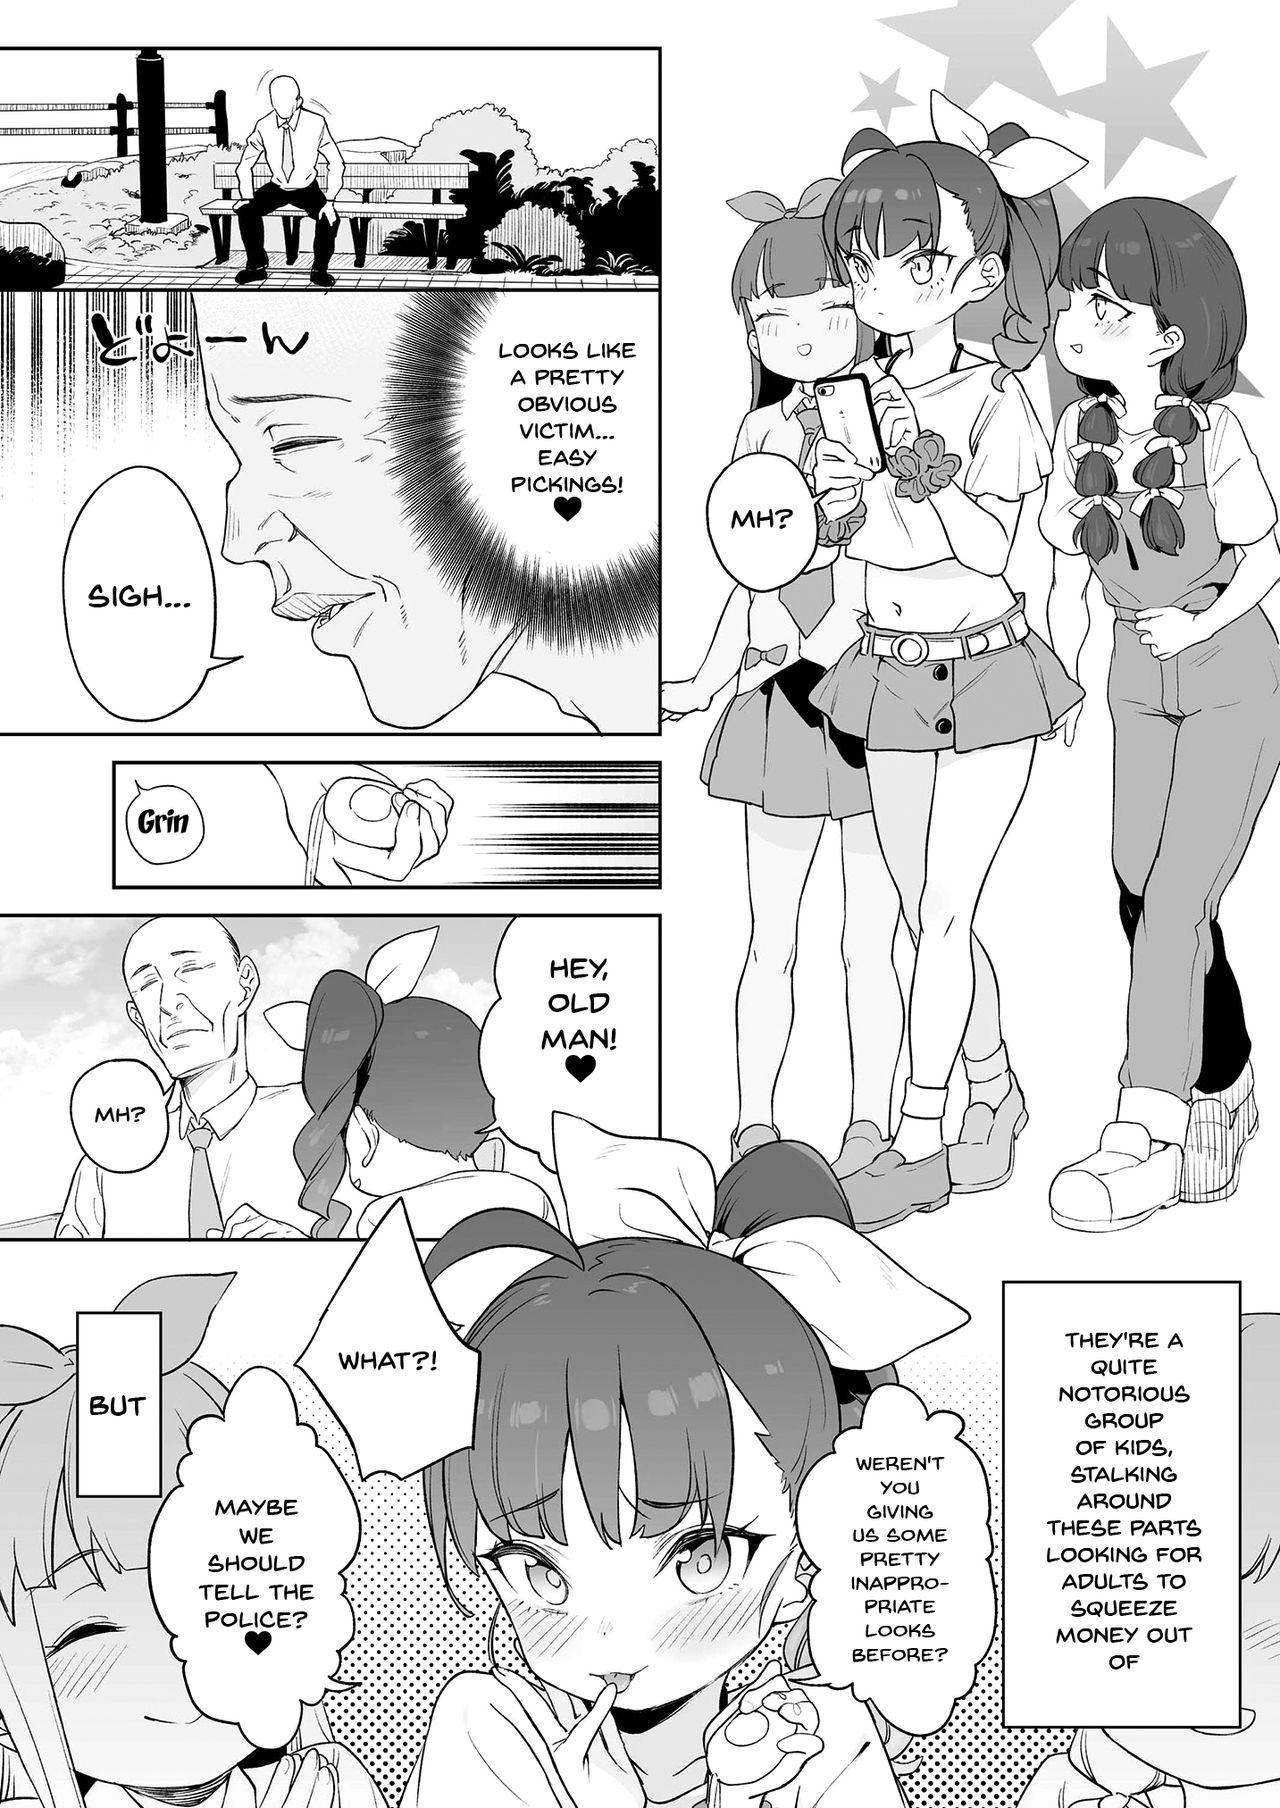 Chacal Mesugaki Wakarase Goudou | A Putting Slutty Brats In Their Place Collection - Original Cogiendo - Page 12